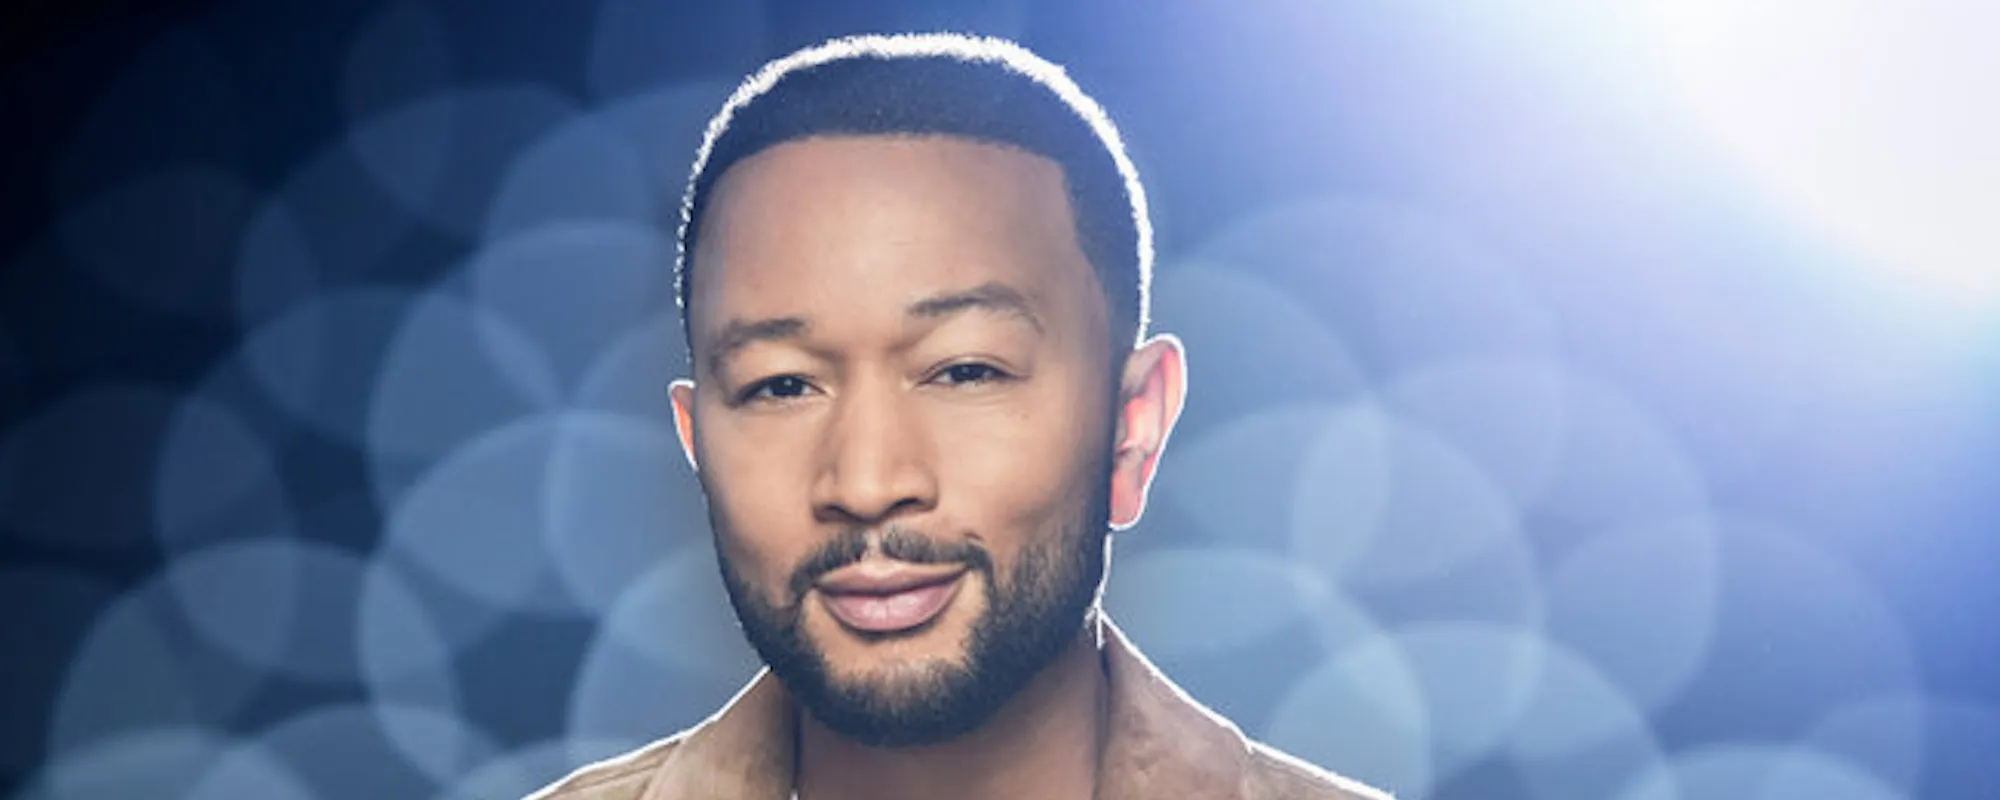 John Legend Opens Up About Rift with Kanye West: “He Was Very Upset with Me”